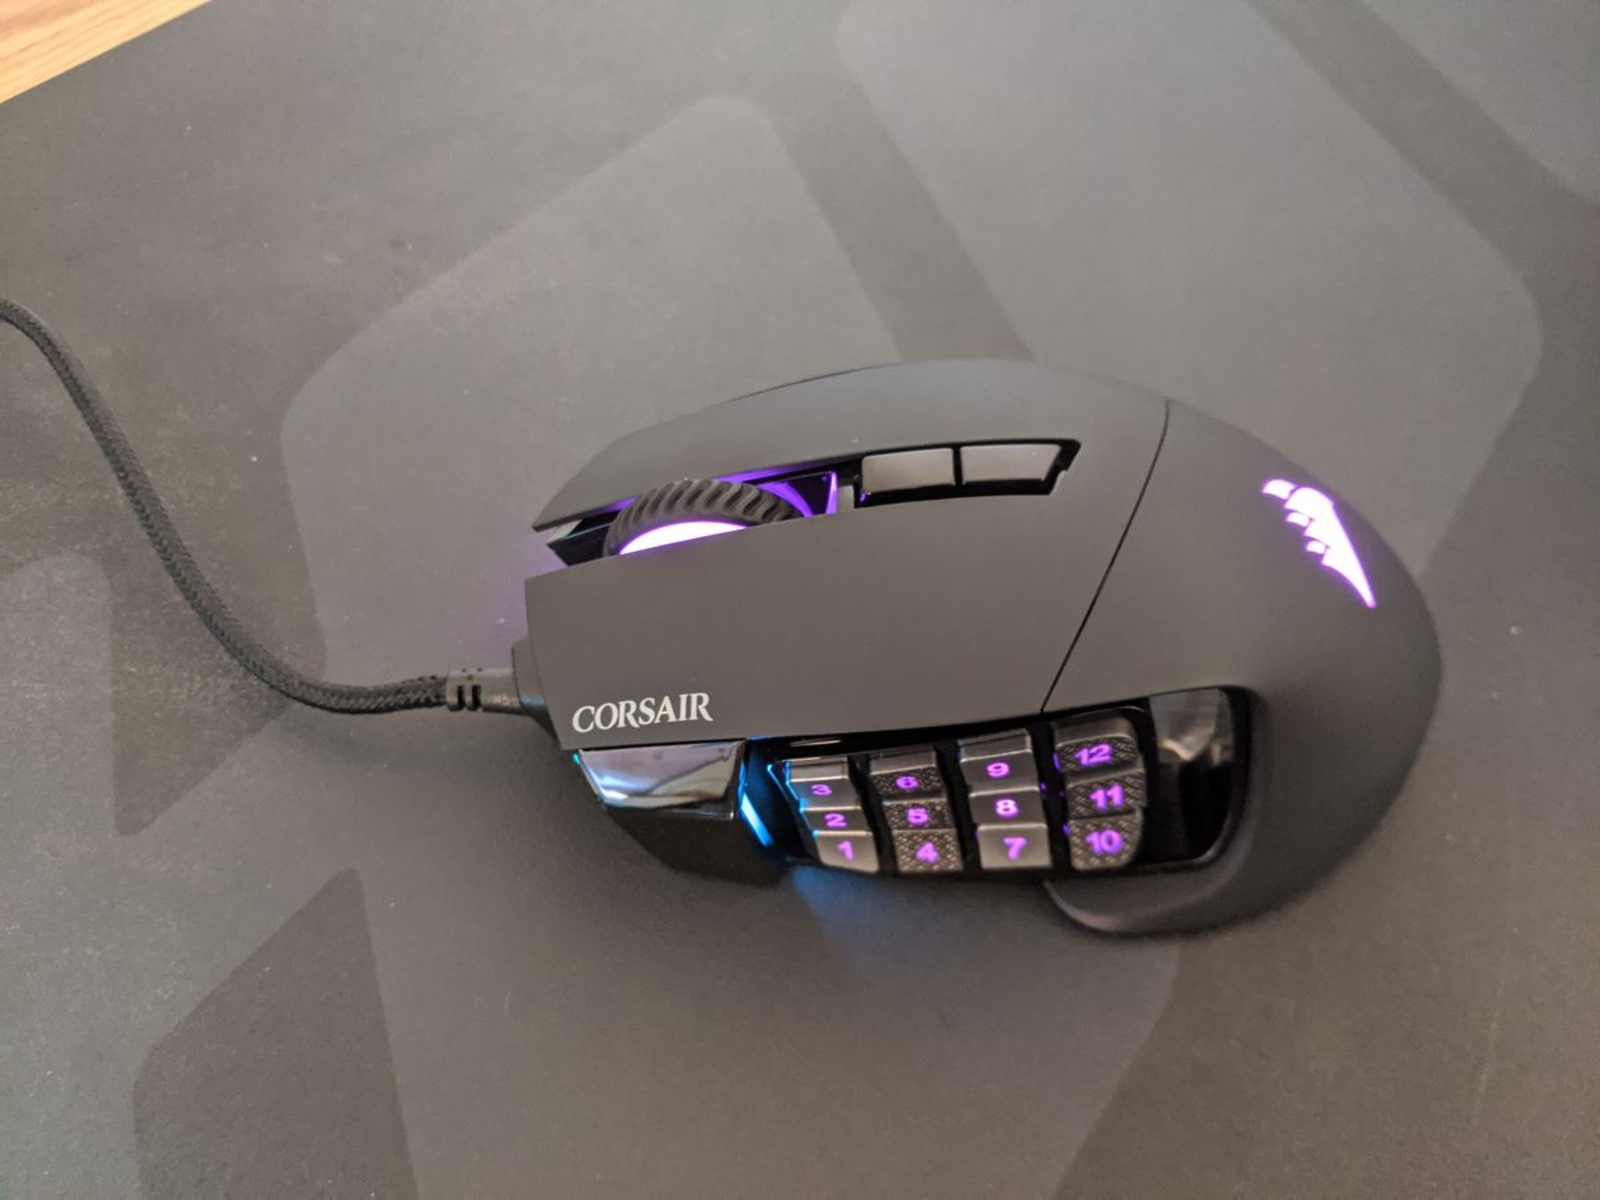 How To Make A Macro With Corsair Gaming Mouse